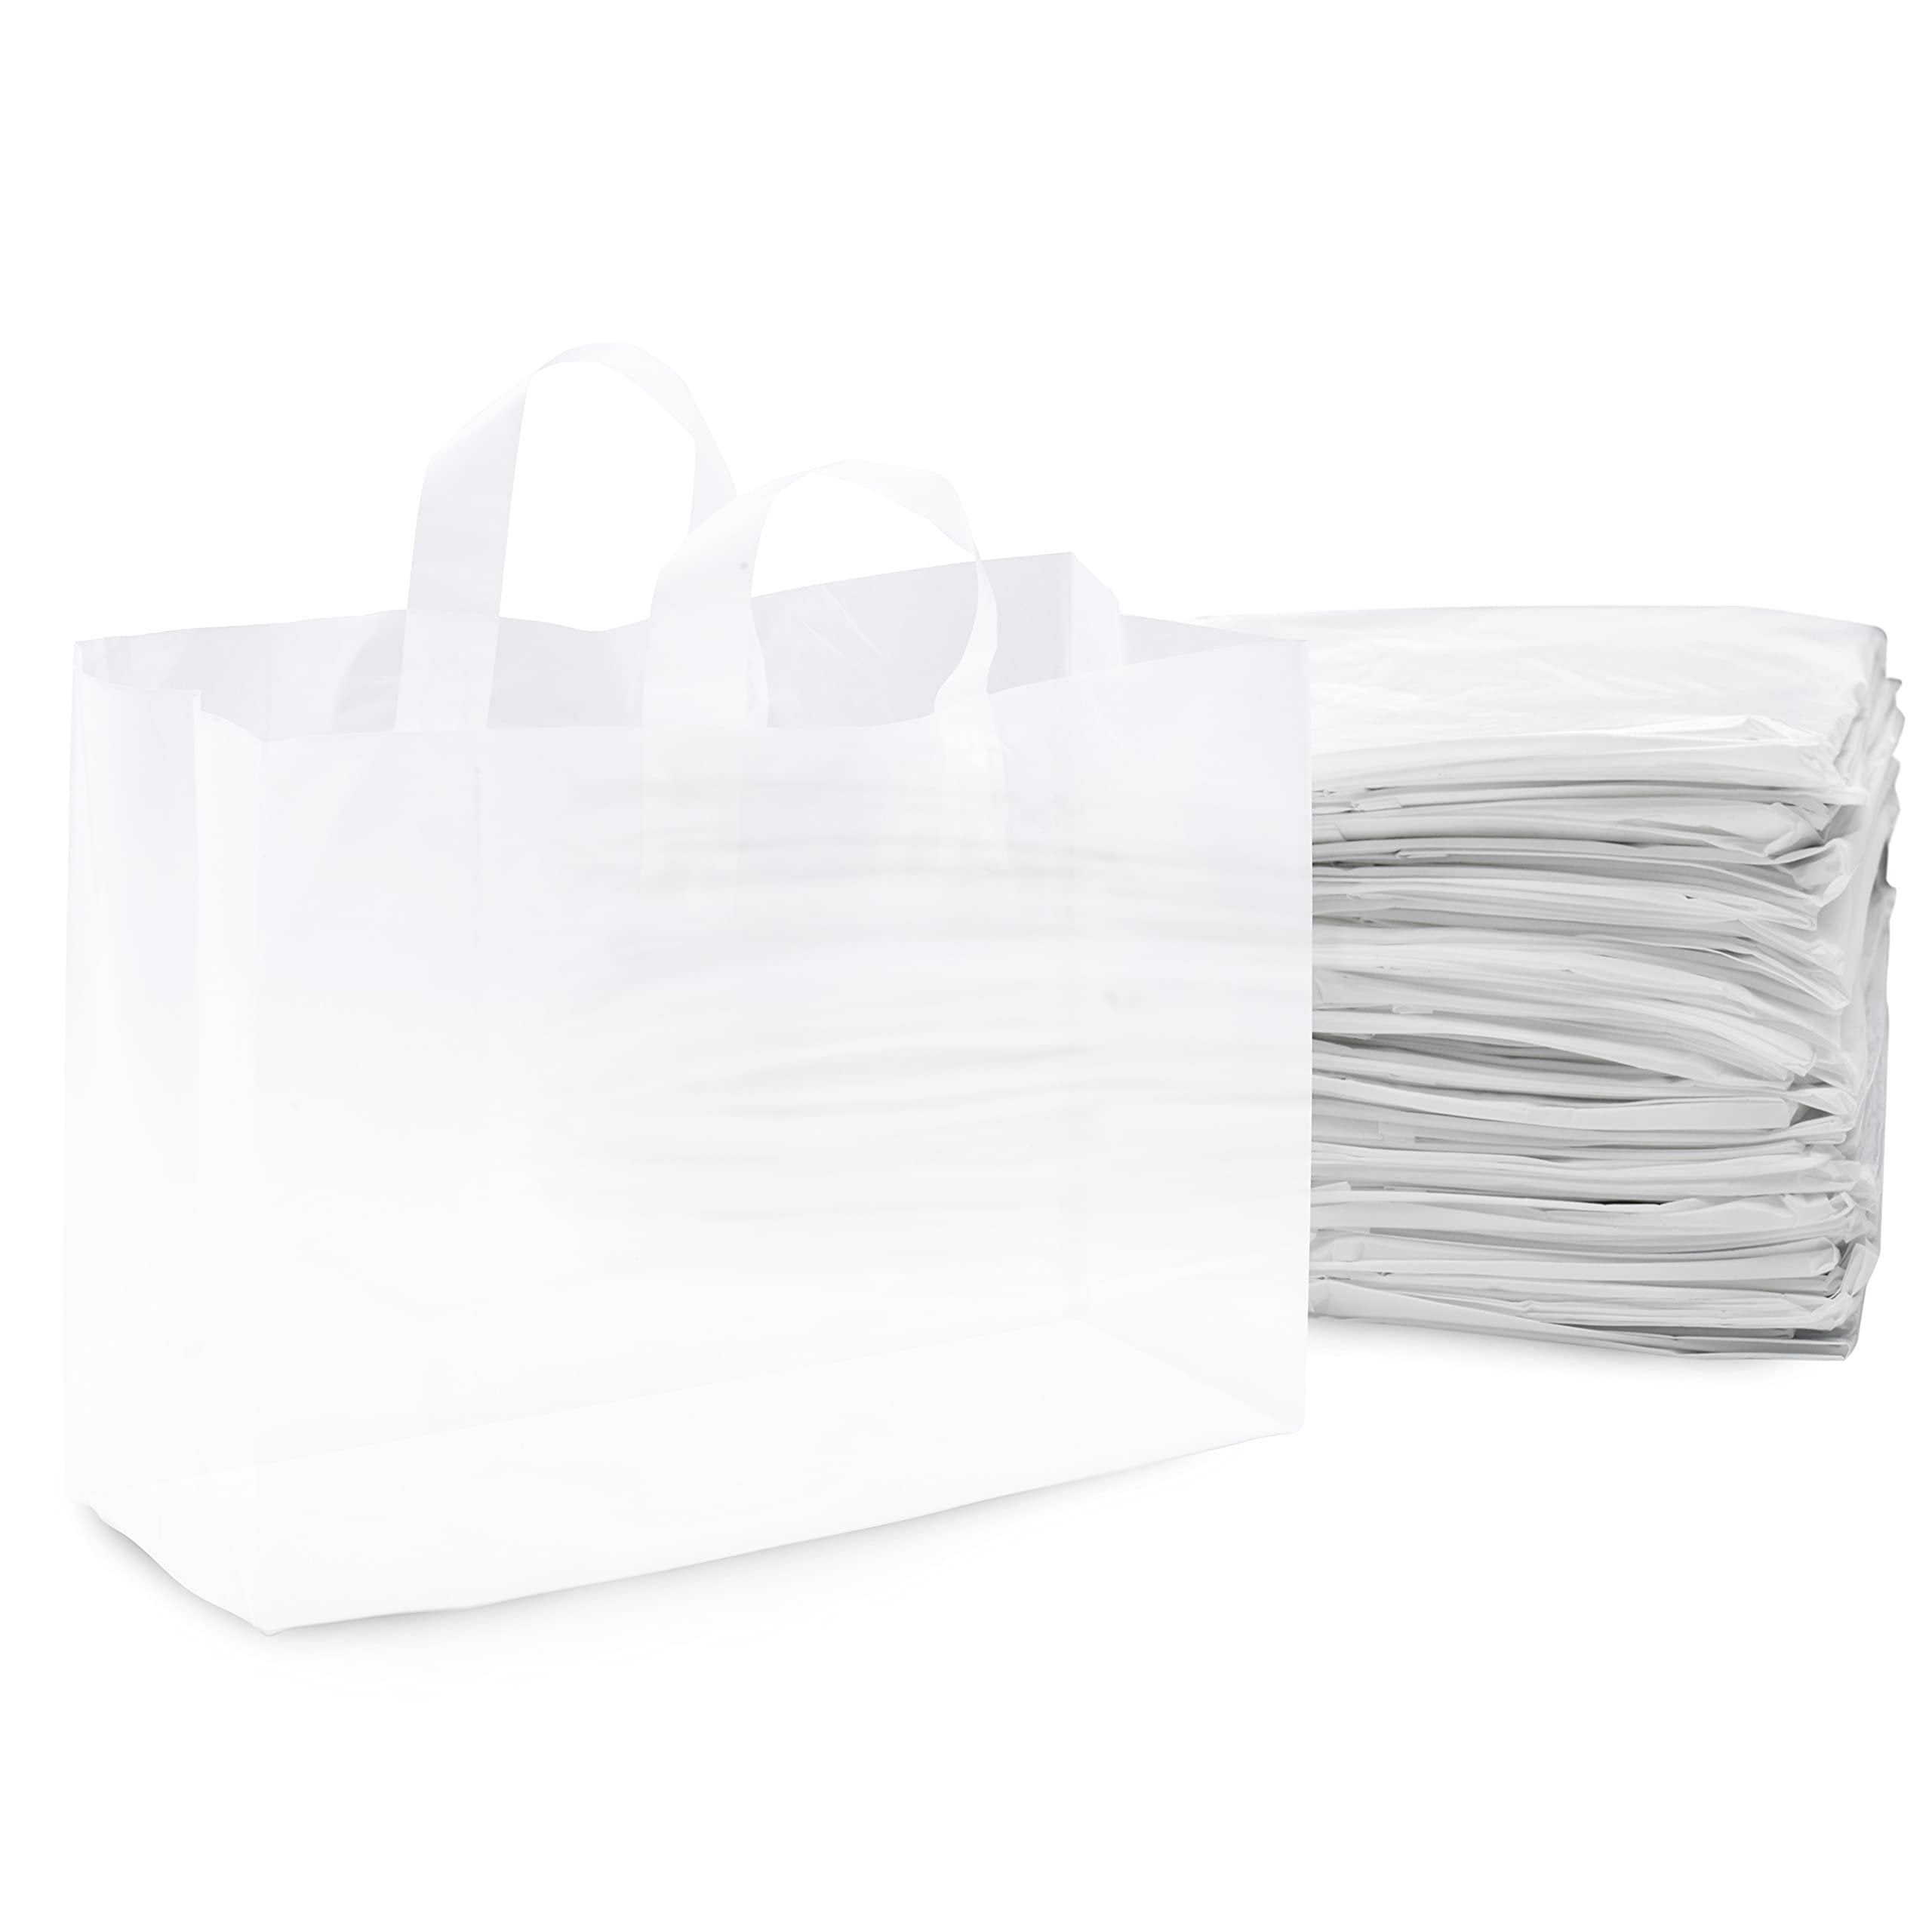 50 Clear Plastic Bags w/ Handles & Bottom for Business, Retail, Gifts - 16x6x12 White